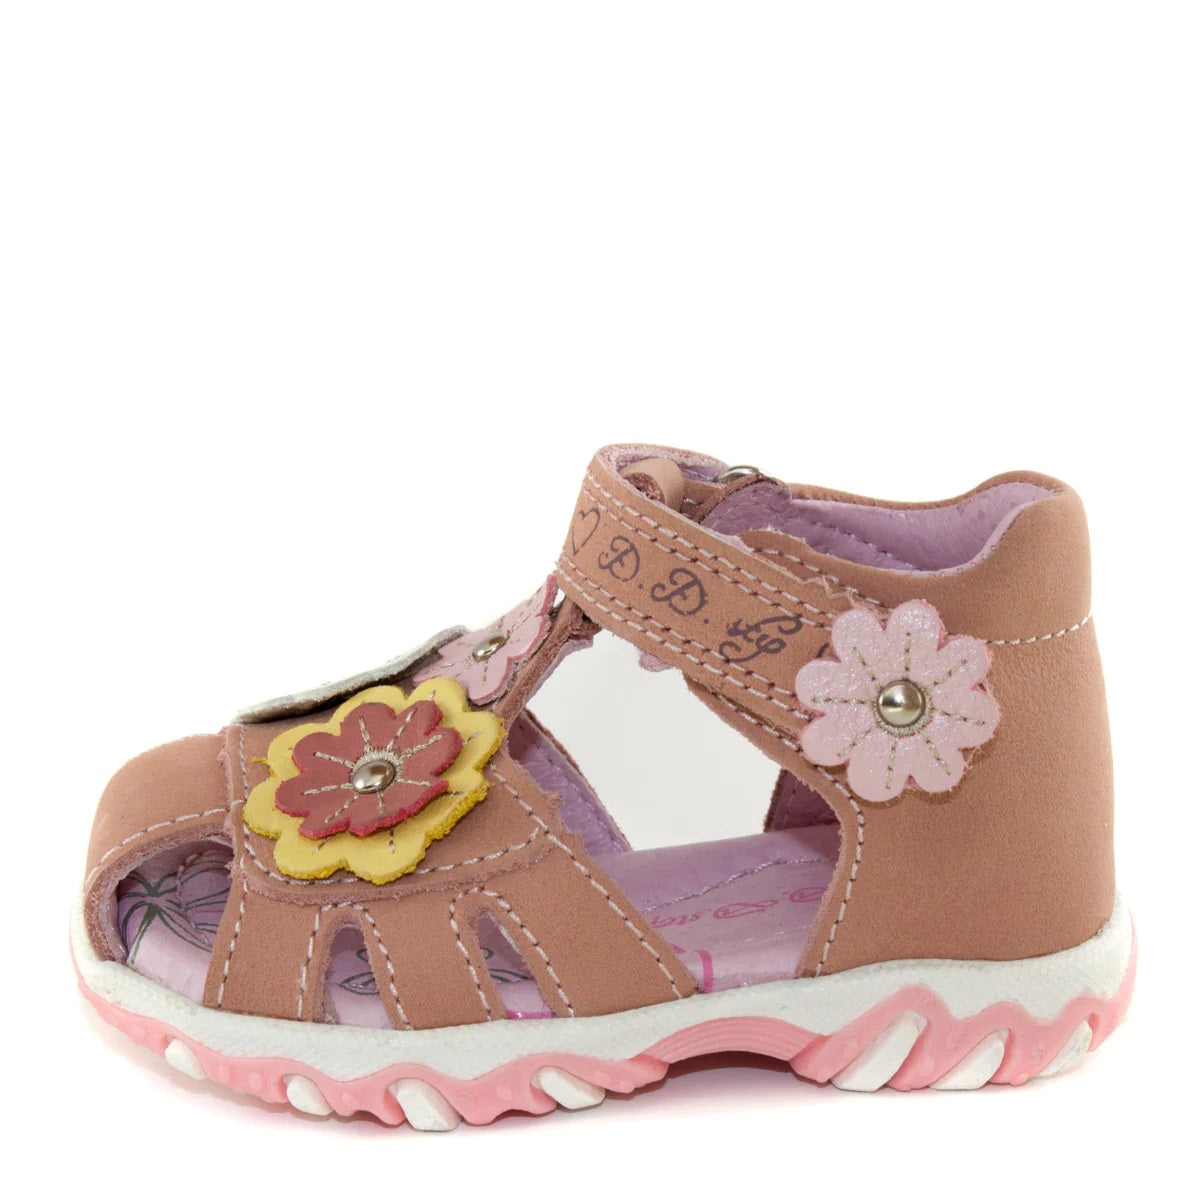 D.D. Step Girls Sandals Pink With Flowers - Supportive Leather Shoes From Europe Kids Orthopedic - shoekid.ca